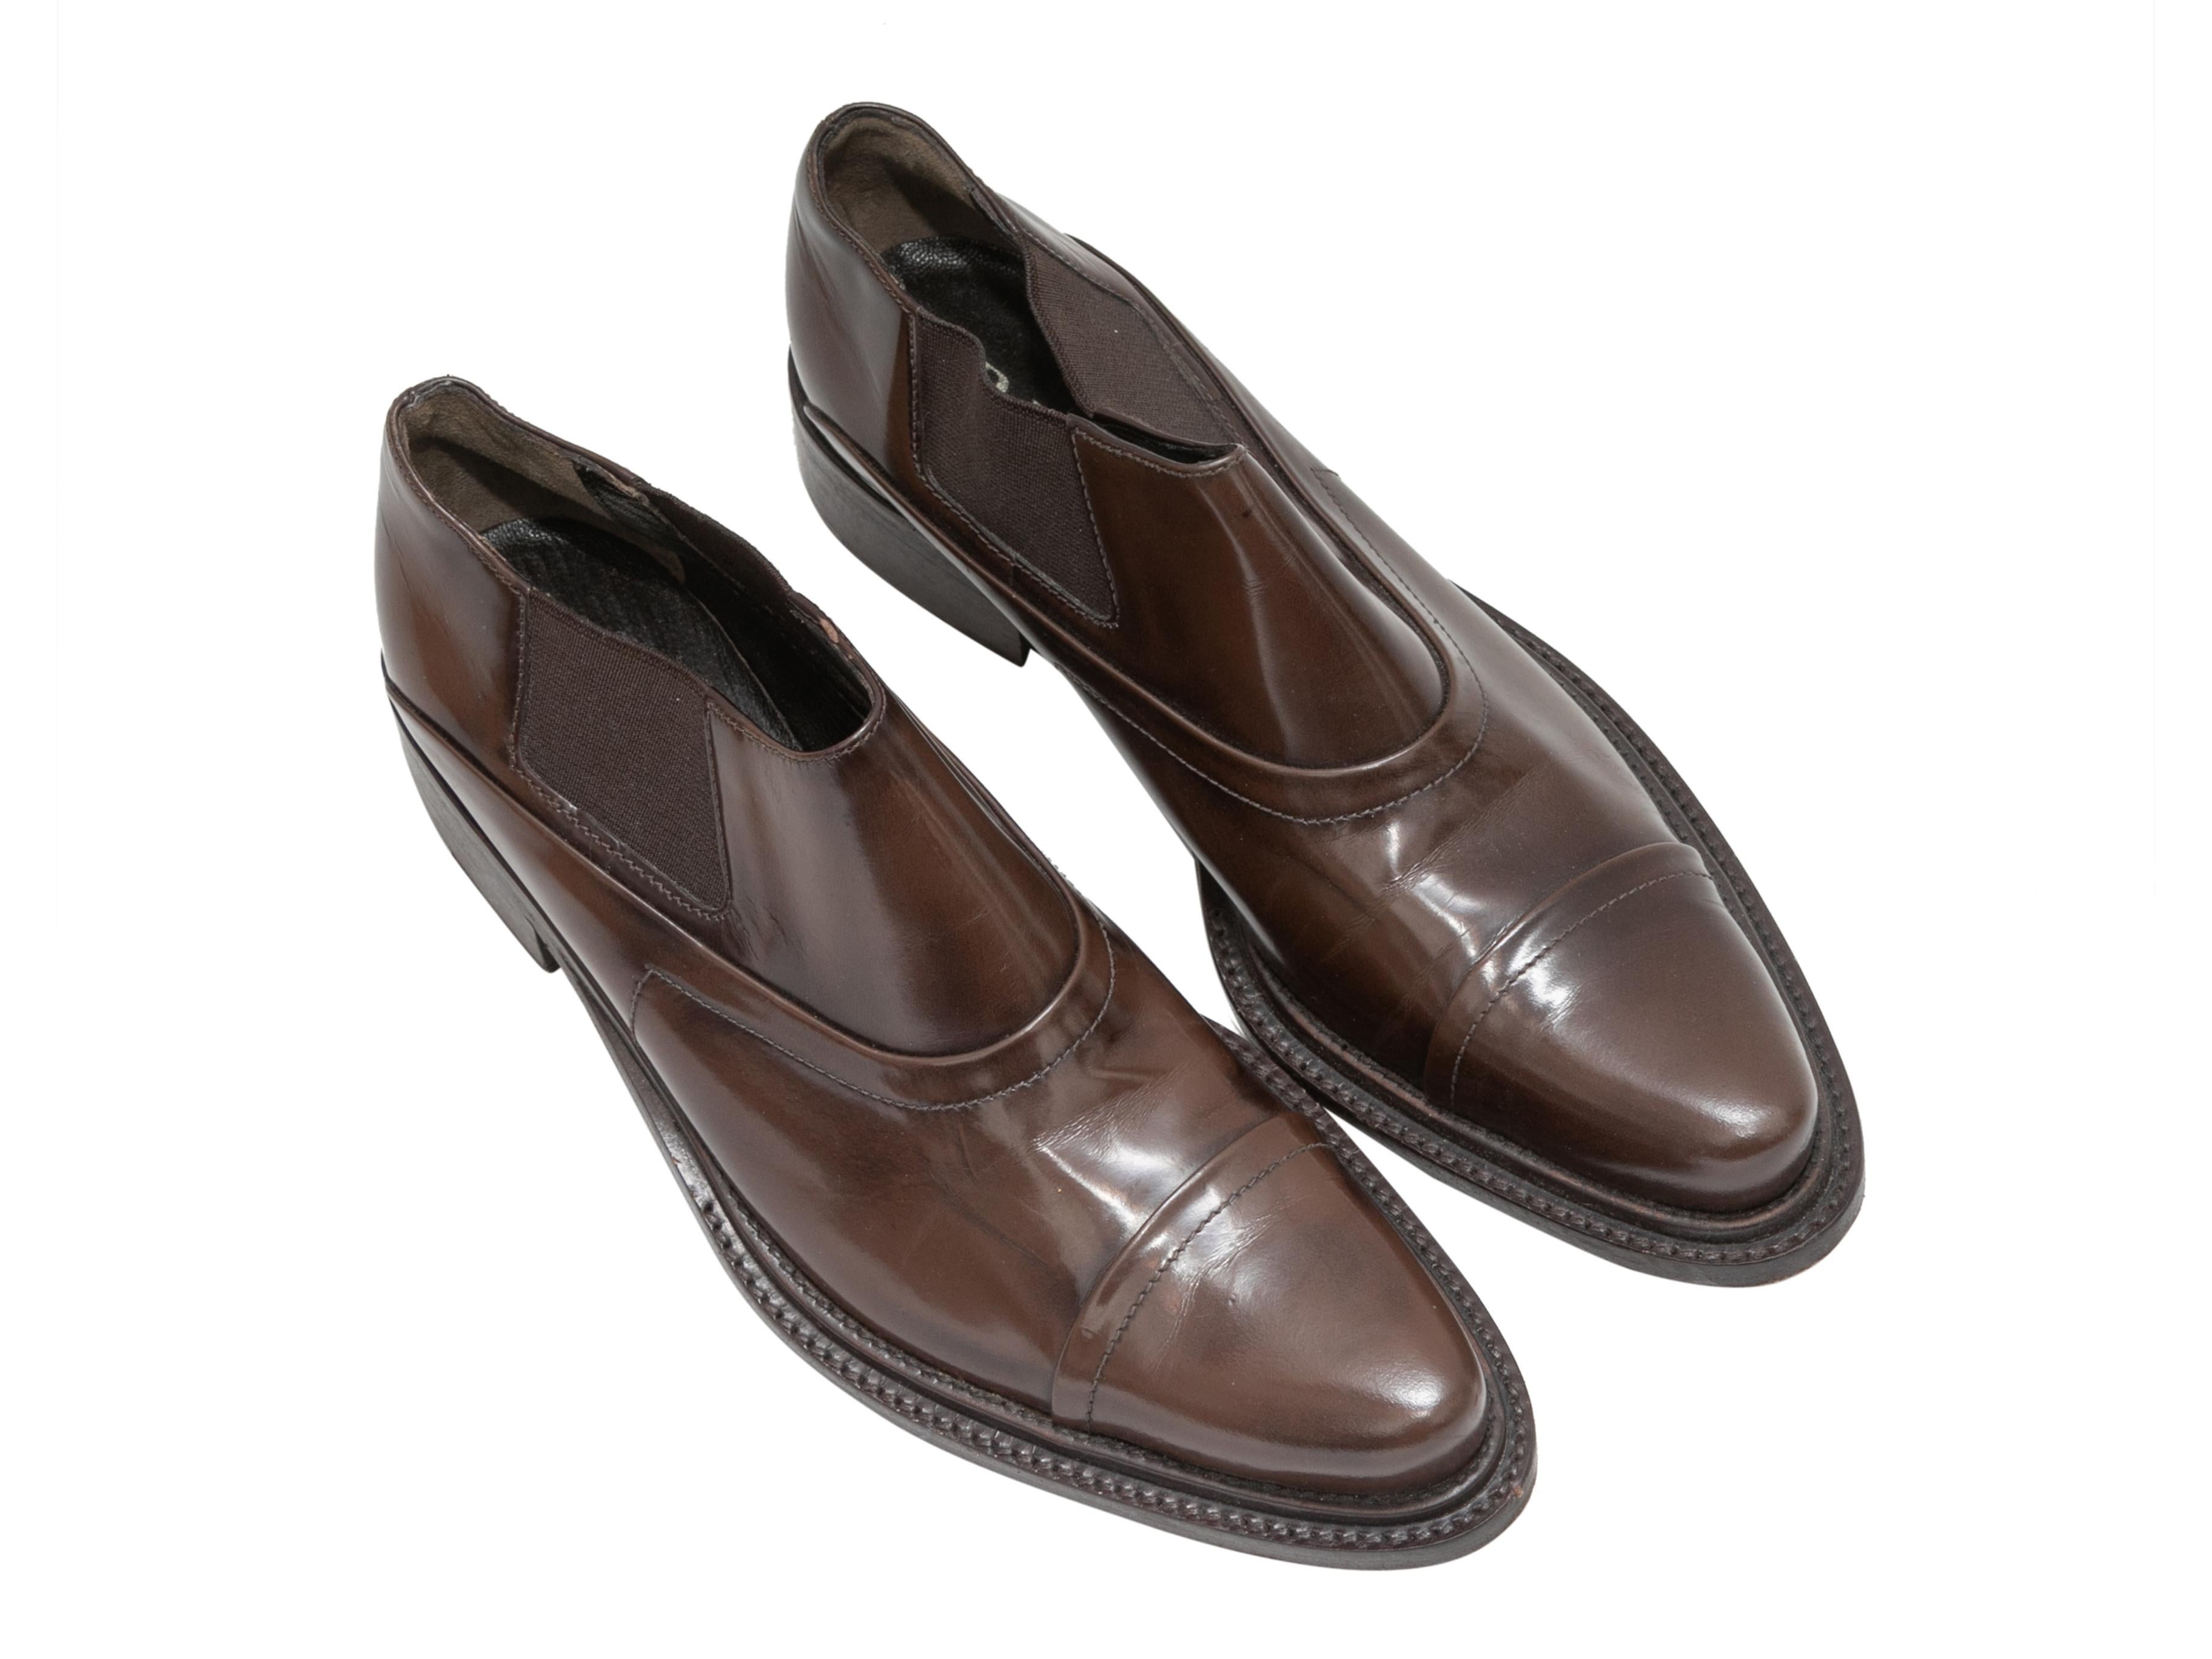 Brown leather dress shoes by Prada. Elasticized gores at sides. Stacked heels. 1.5